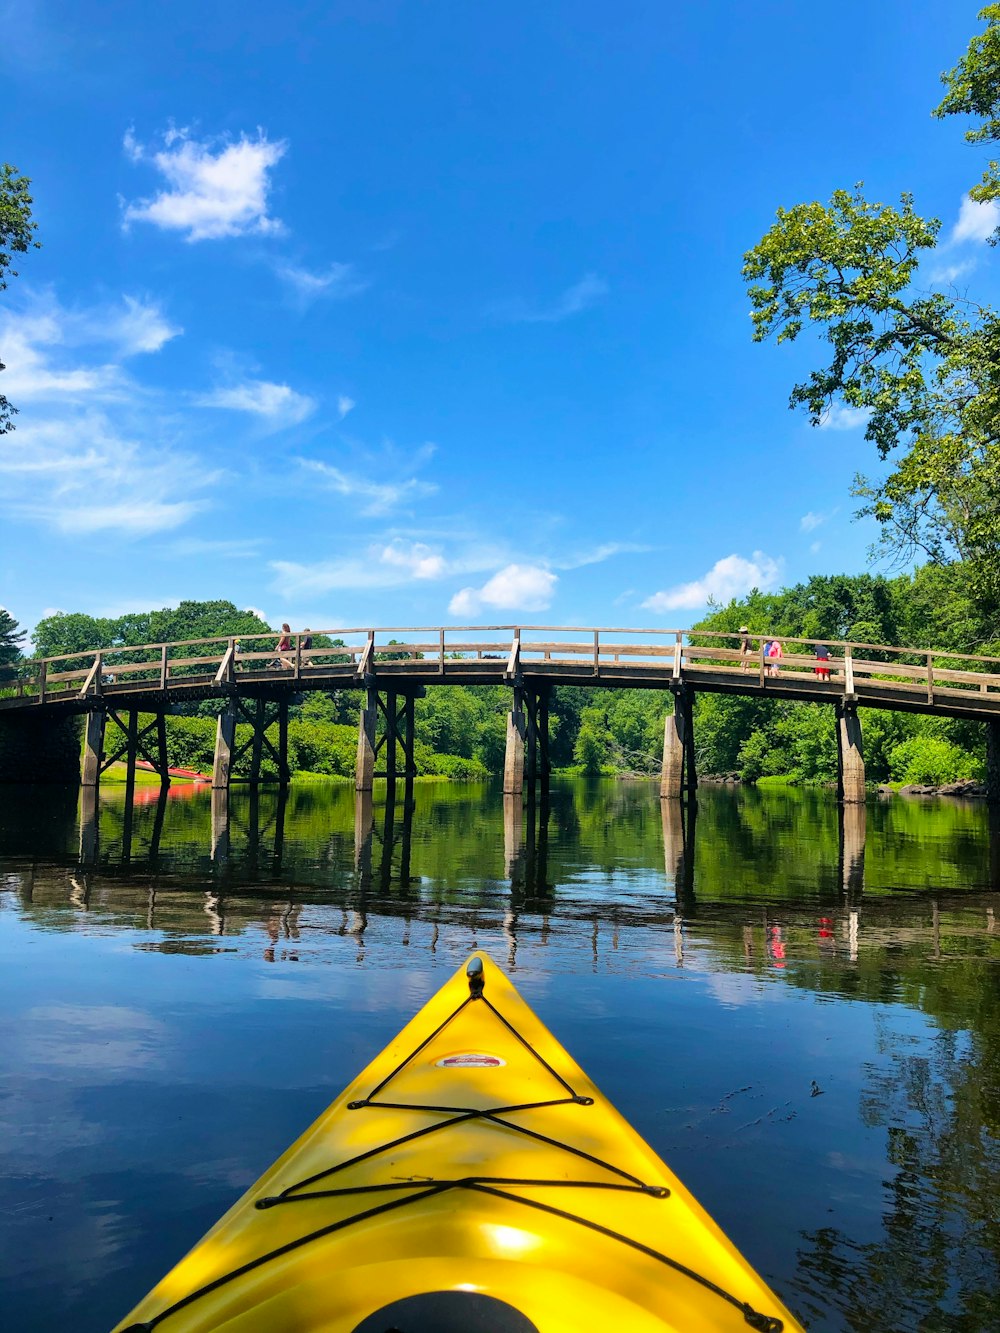 yellow kayak on river under blue sky during daytime